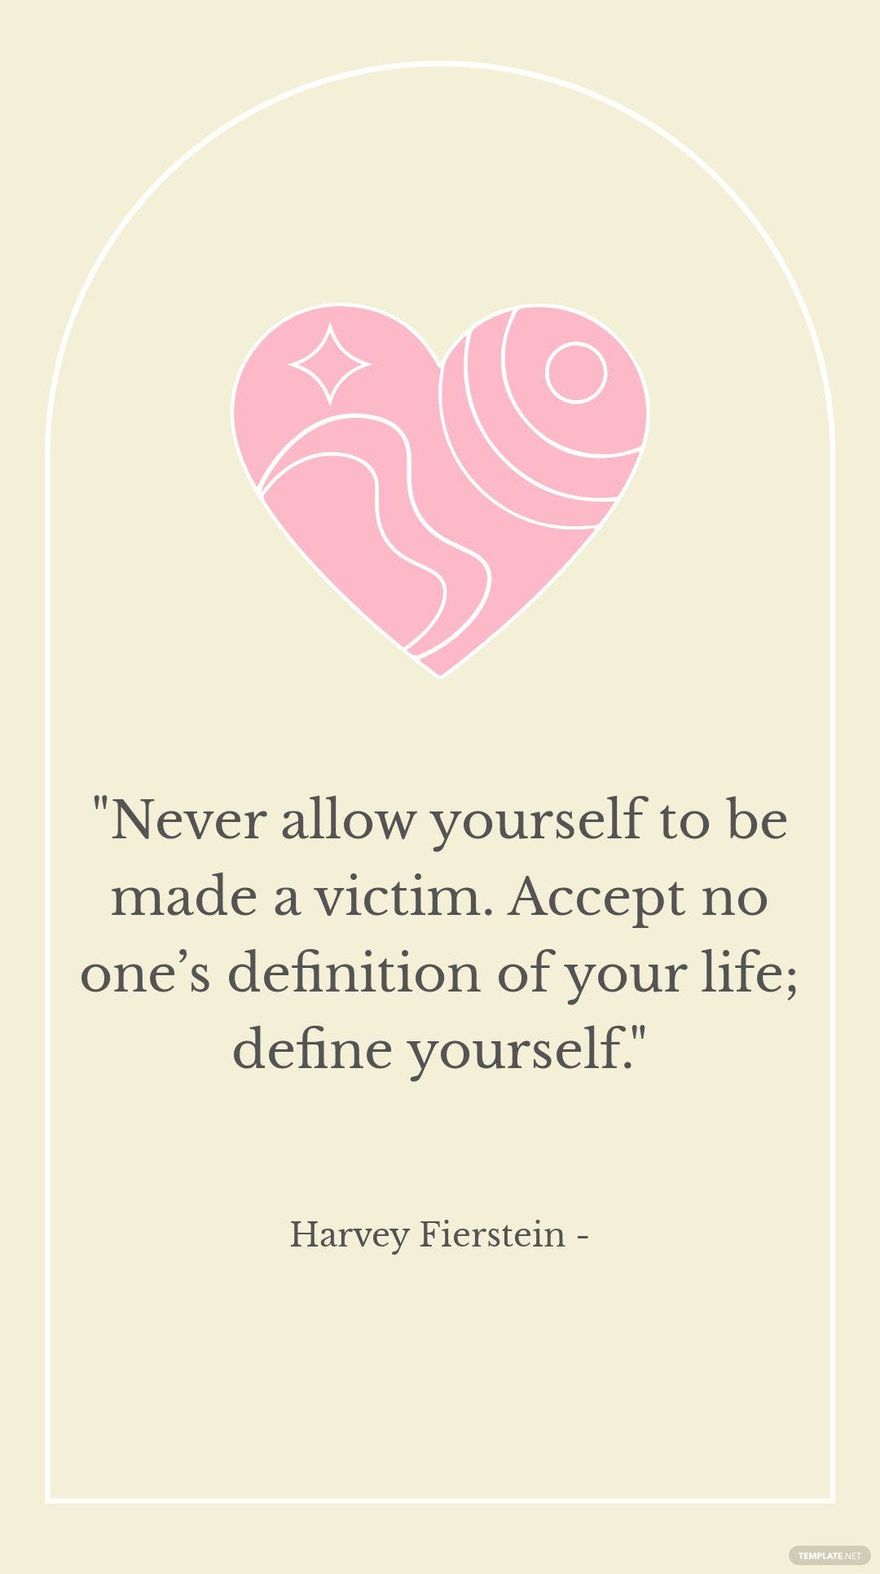 Harvey Fierstein - Never allow yourself to be made a victim. Accept no one’s definition of your life; define yourself.